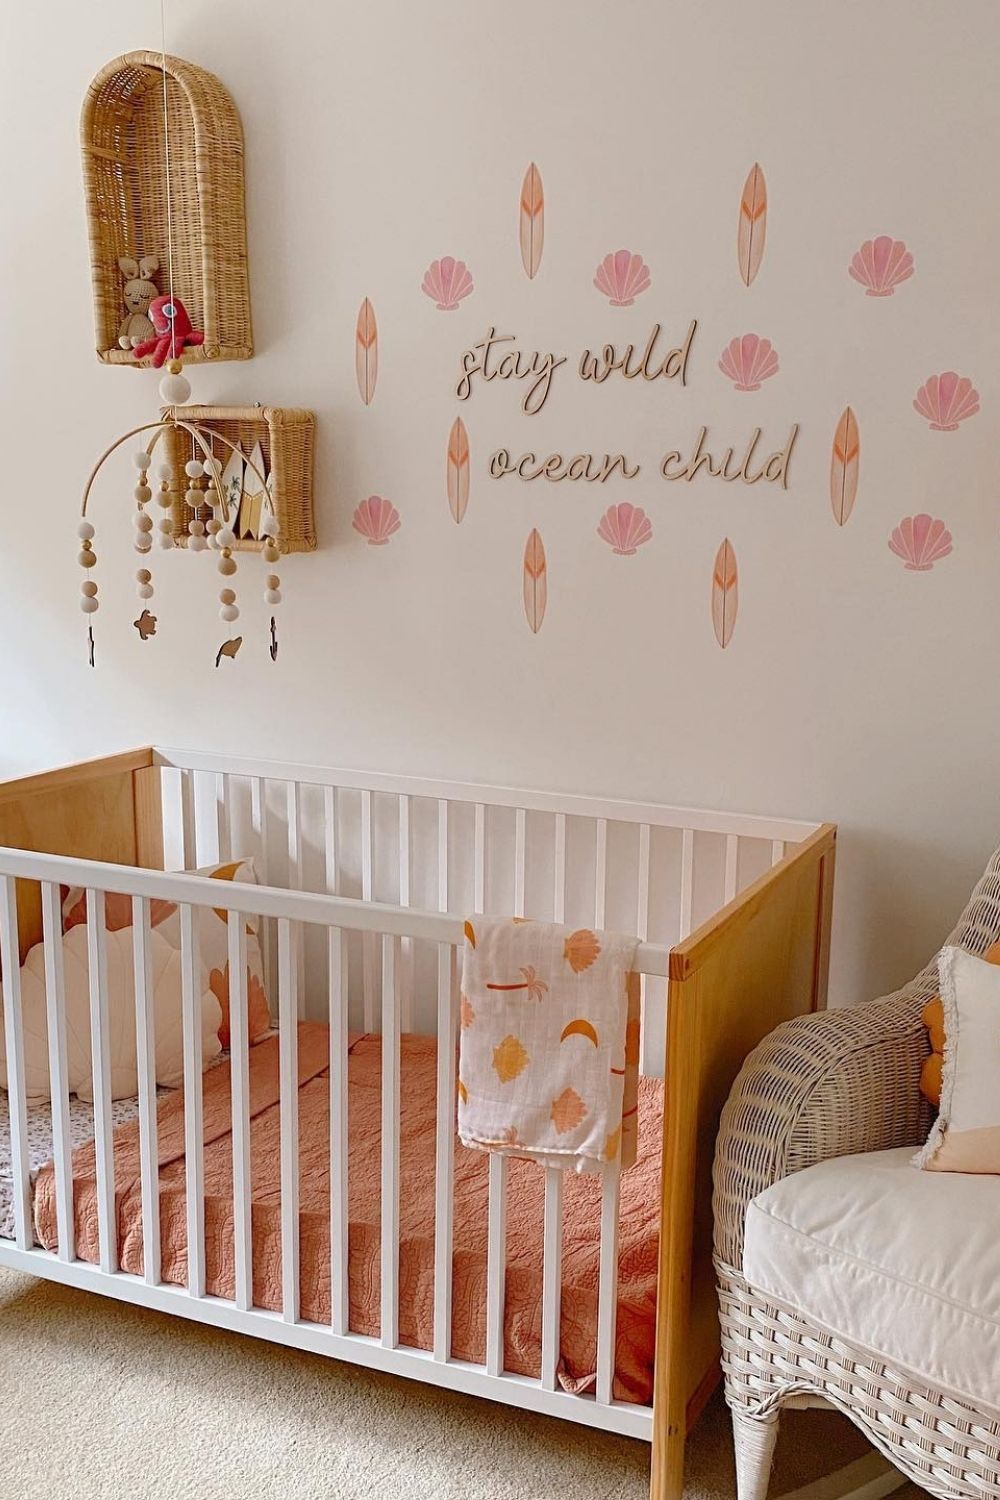 Top 10 Must-See Character Nurseries - Our Little Beach Tribe